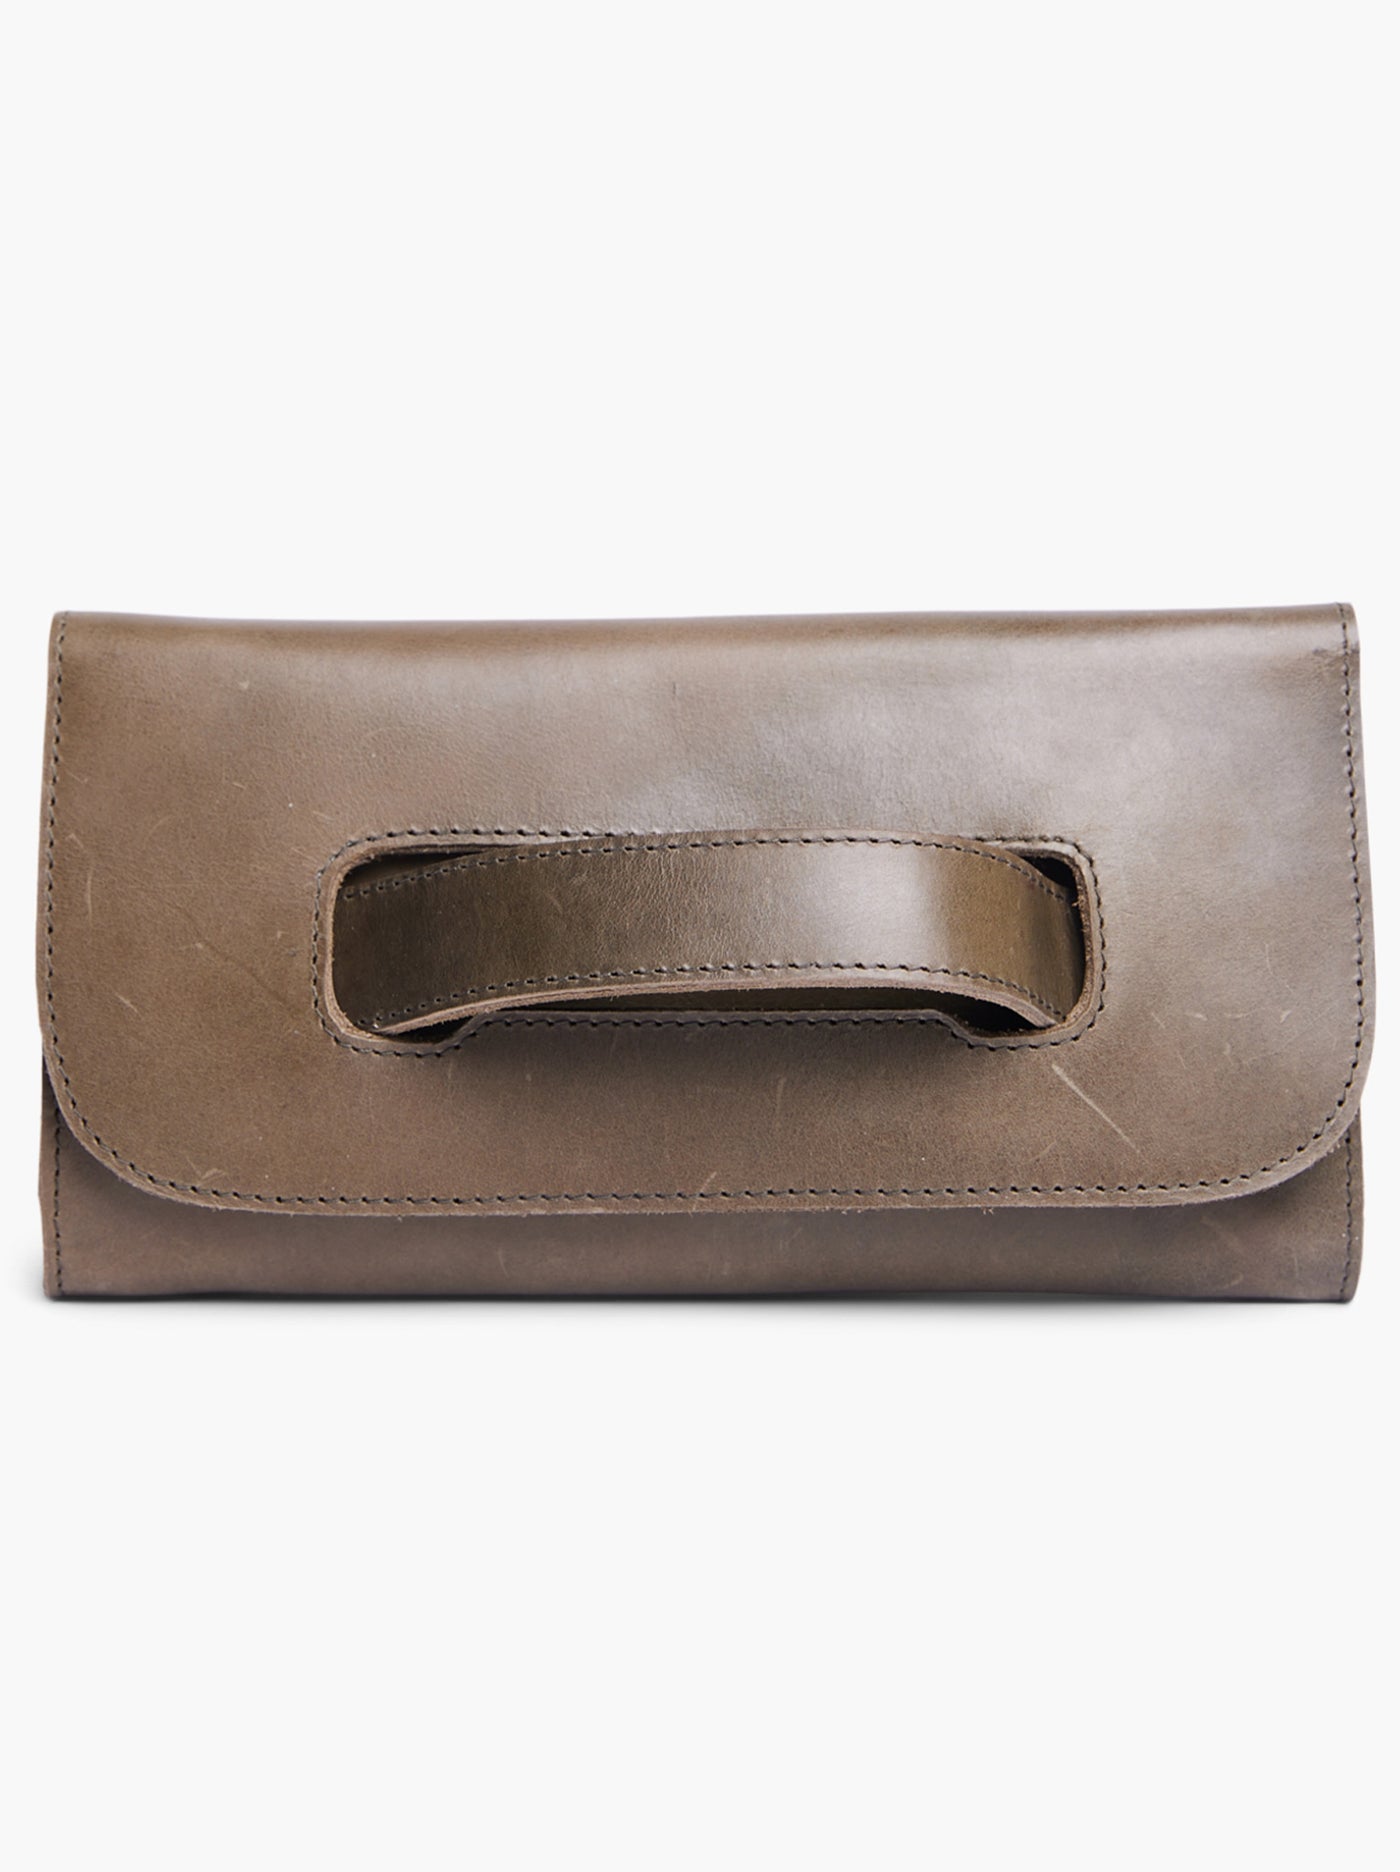 Able: Mare Handle Clutch - Olive